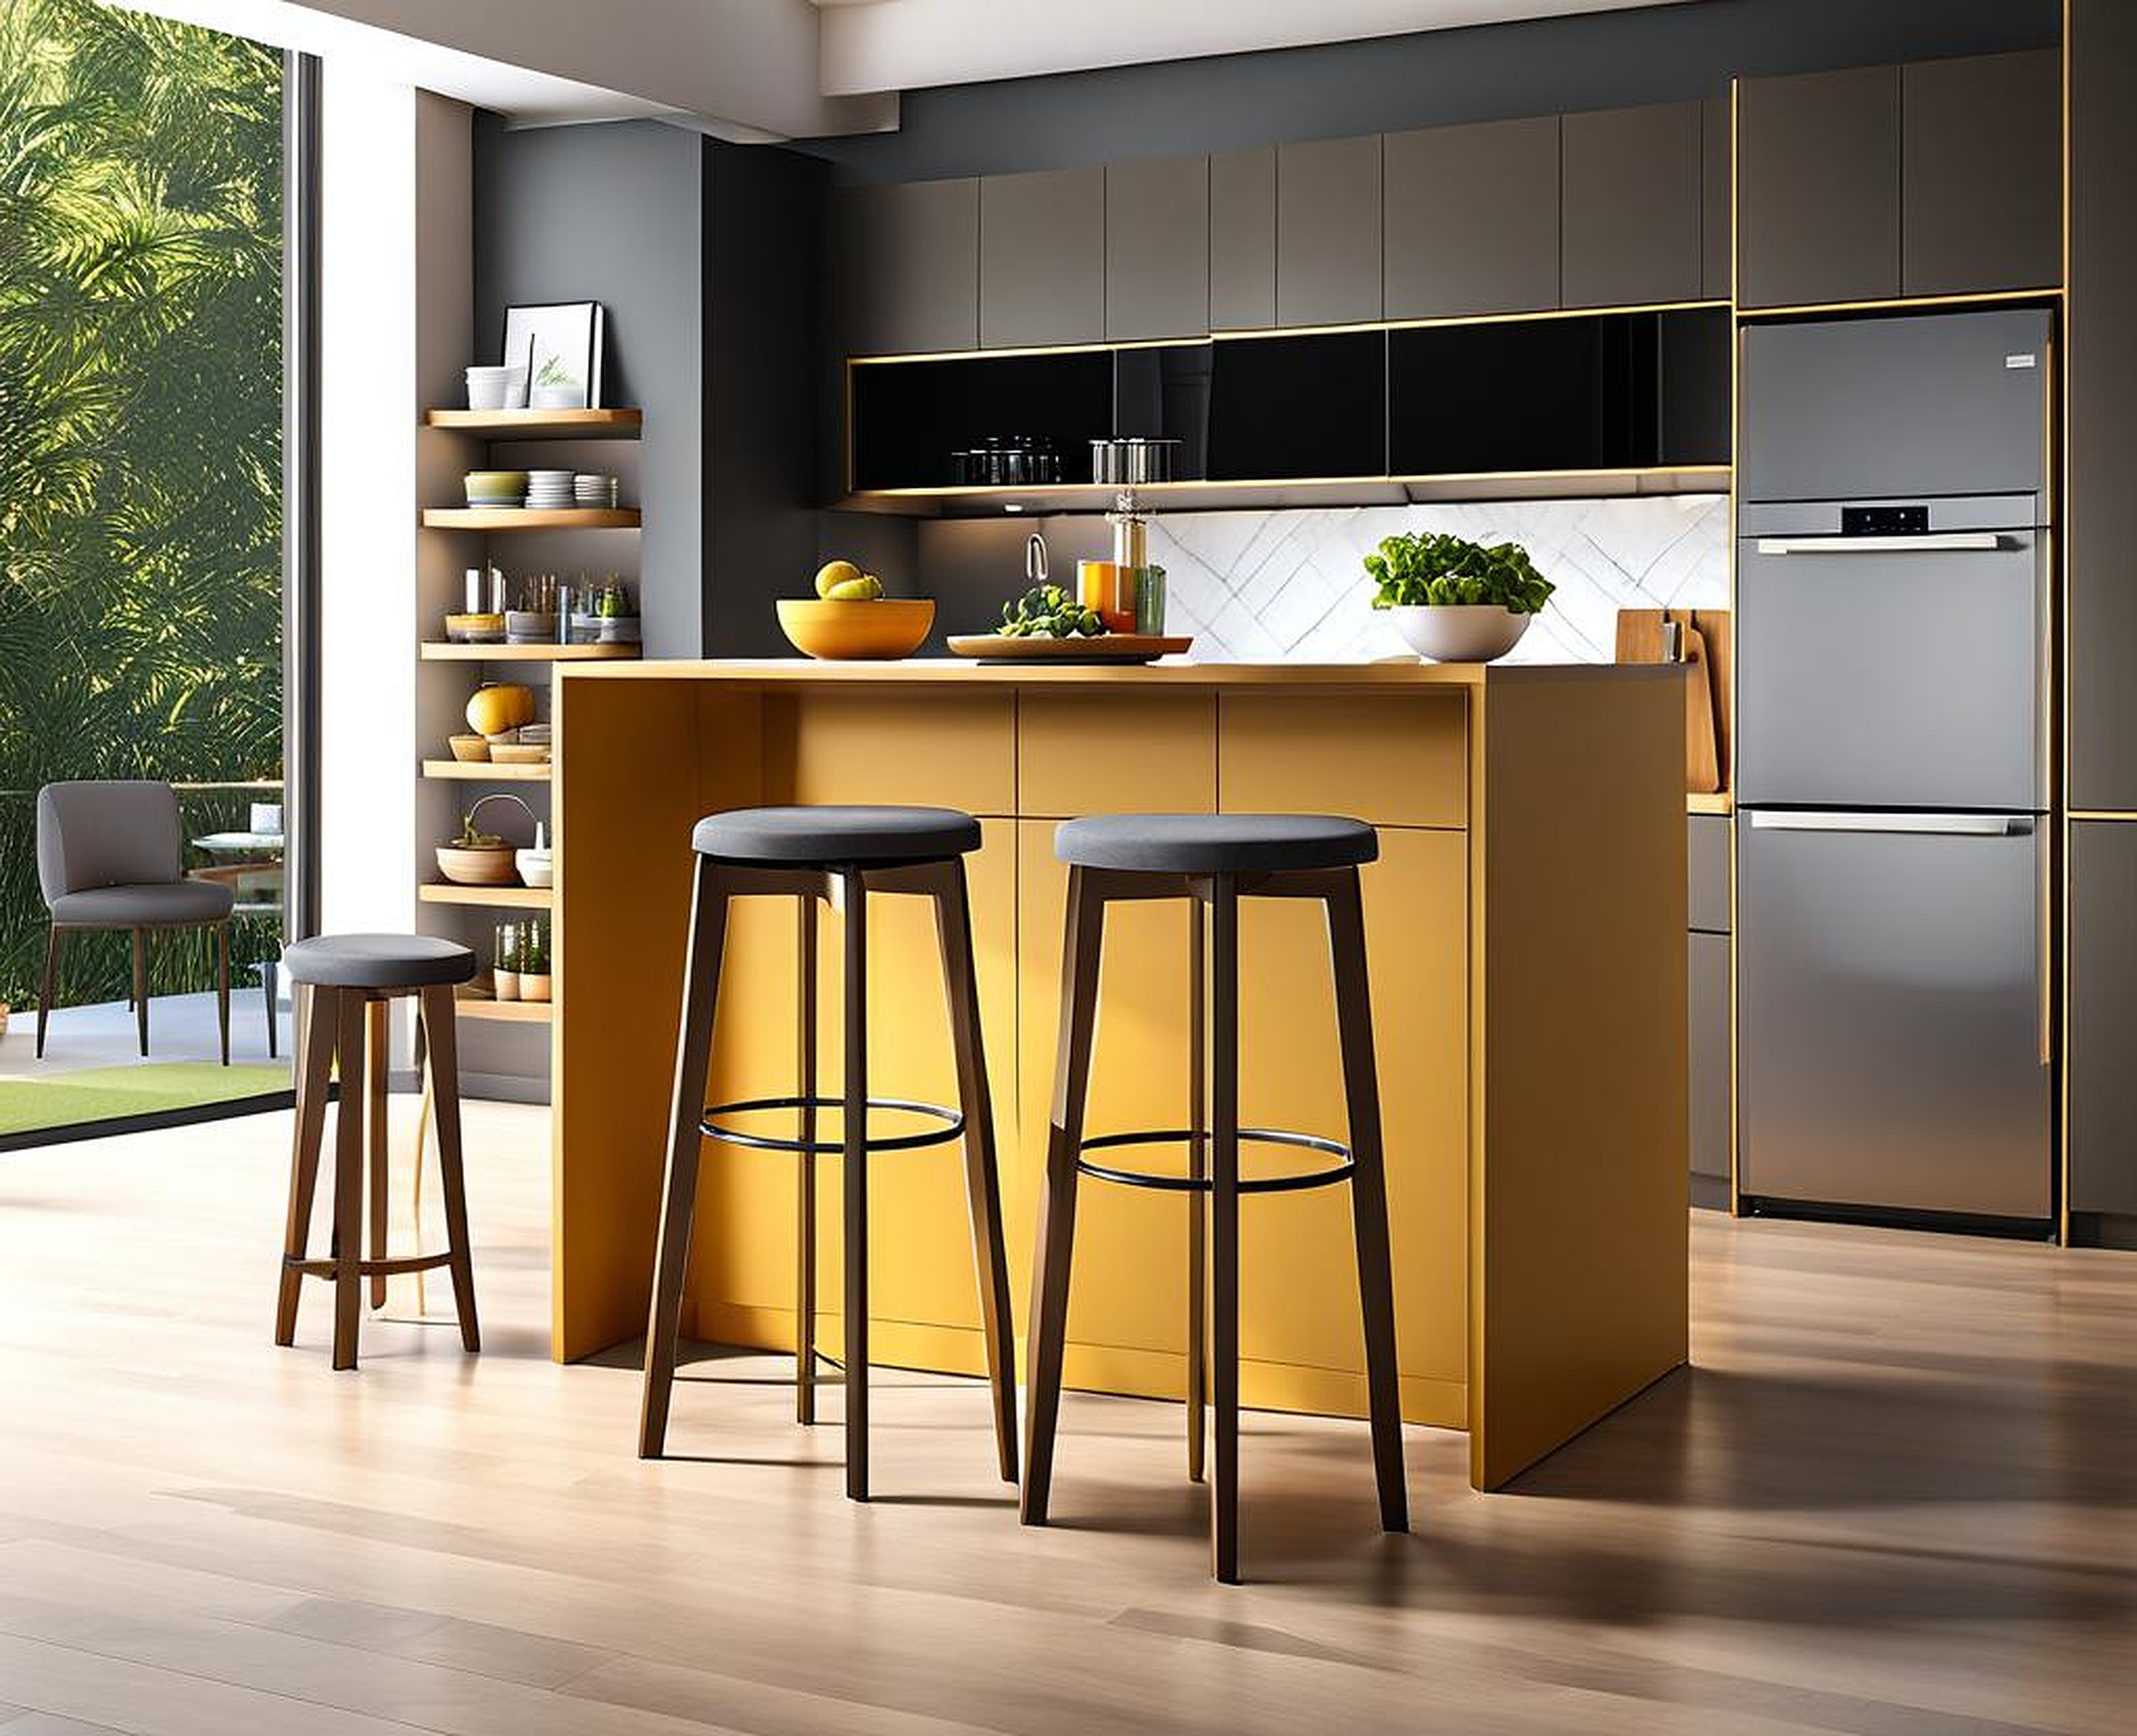 Tall Kitchen Table with Storage and stools for a Functional and Stylish Kitchen